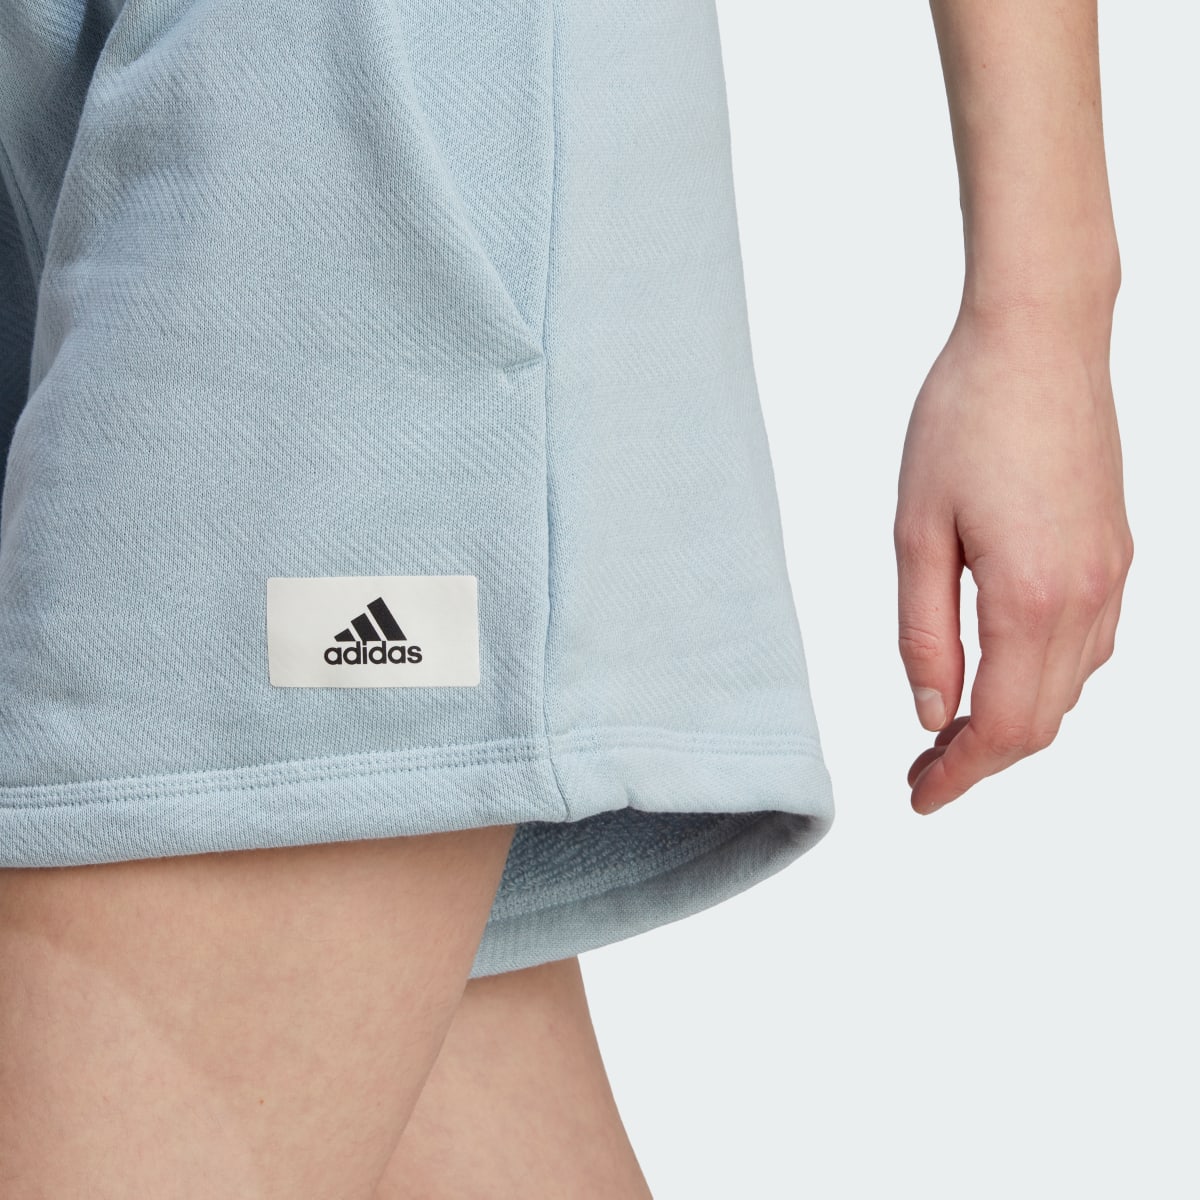 Adidas Shorts Lounge French Terry. 5